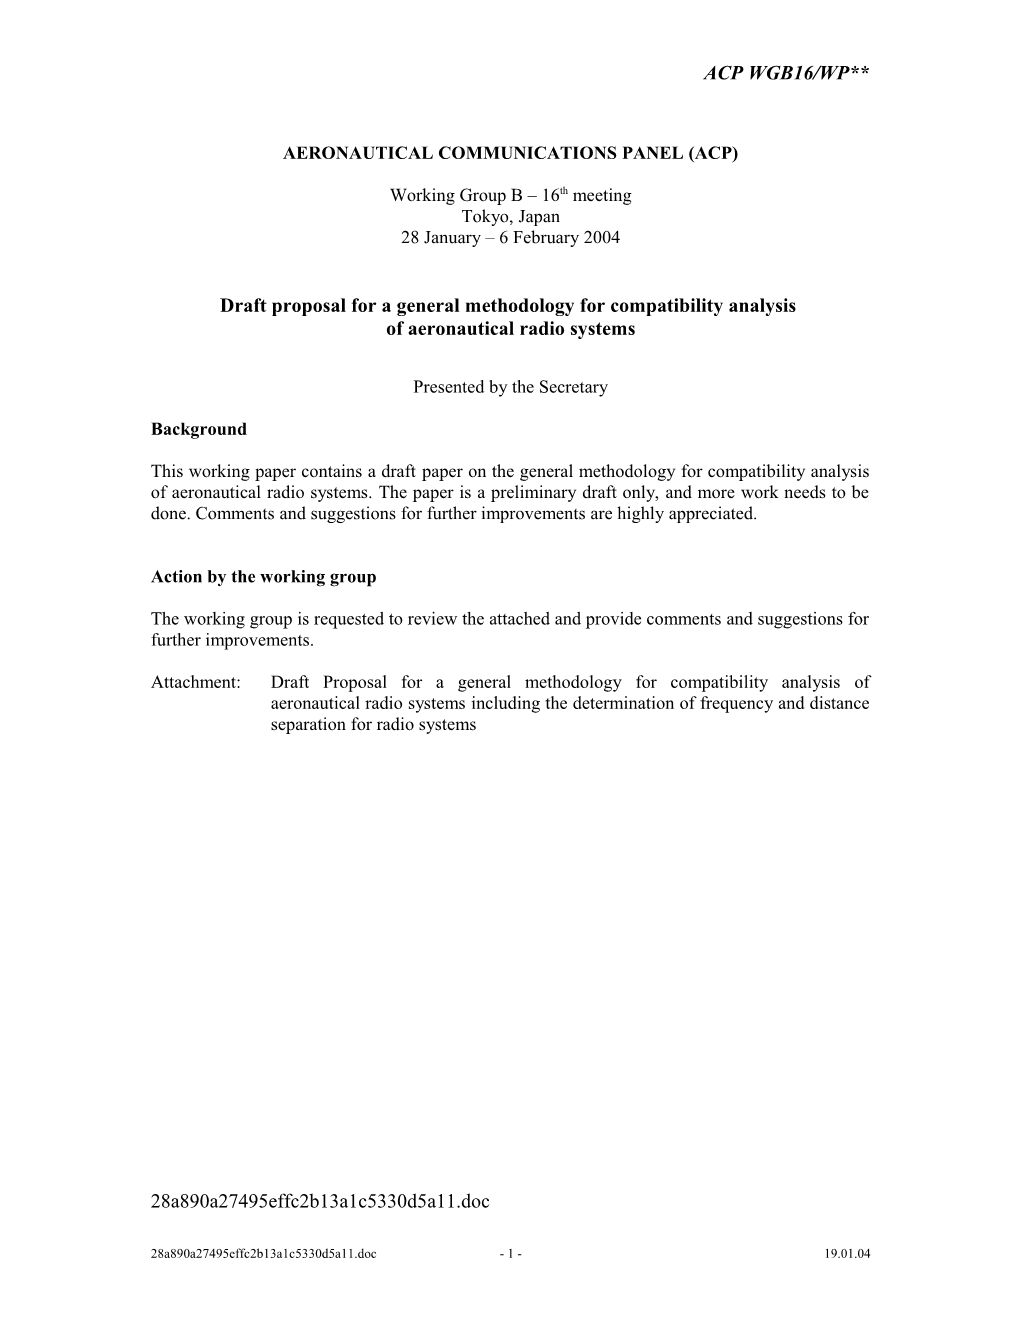 Draft Proposal for a General Methodology for Compatibility Analysis of Aeronautical Radio